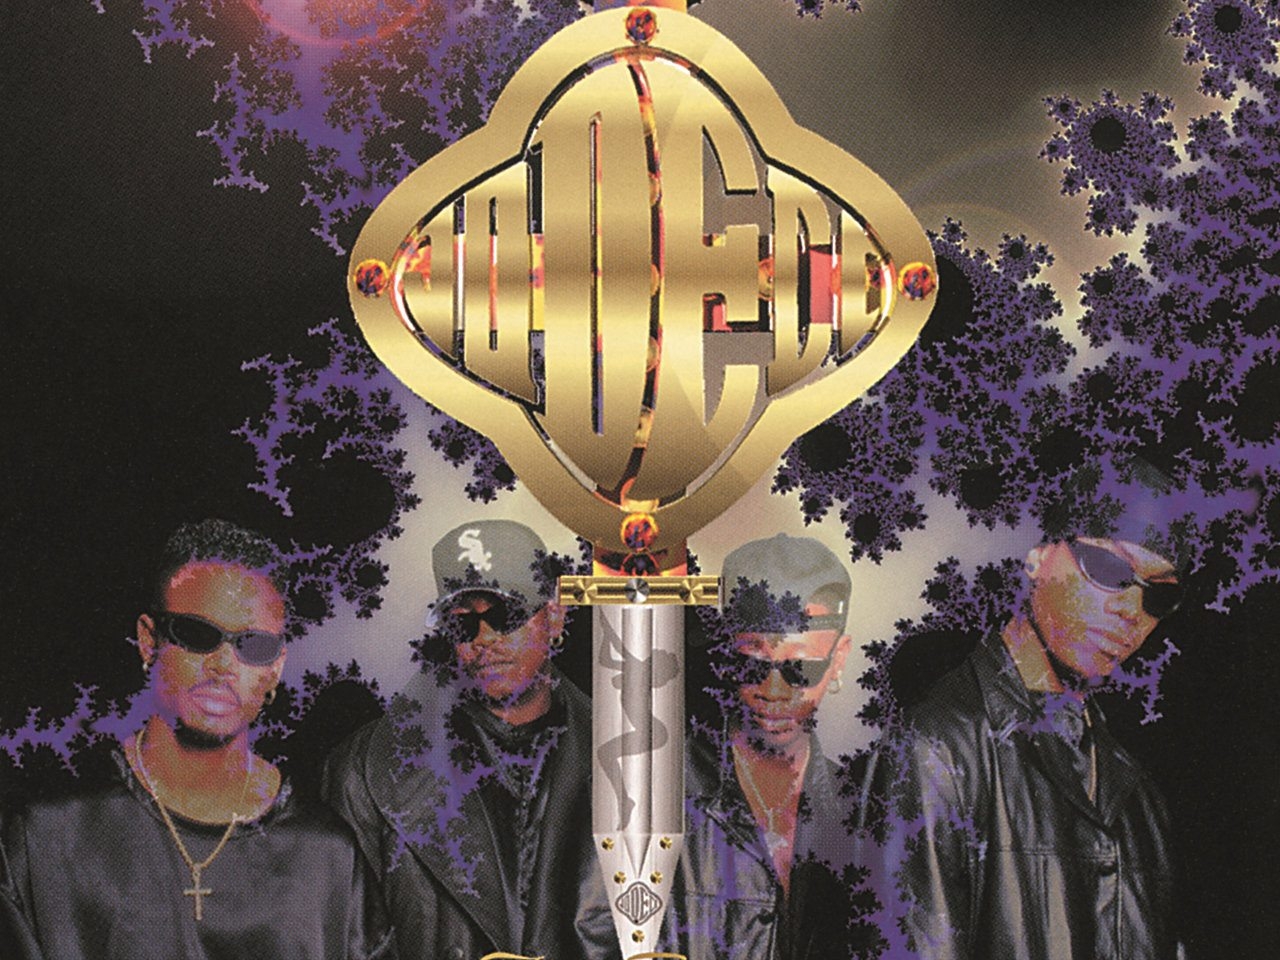 Jodeci The Show The Afterparty The Hotel Album Cover